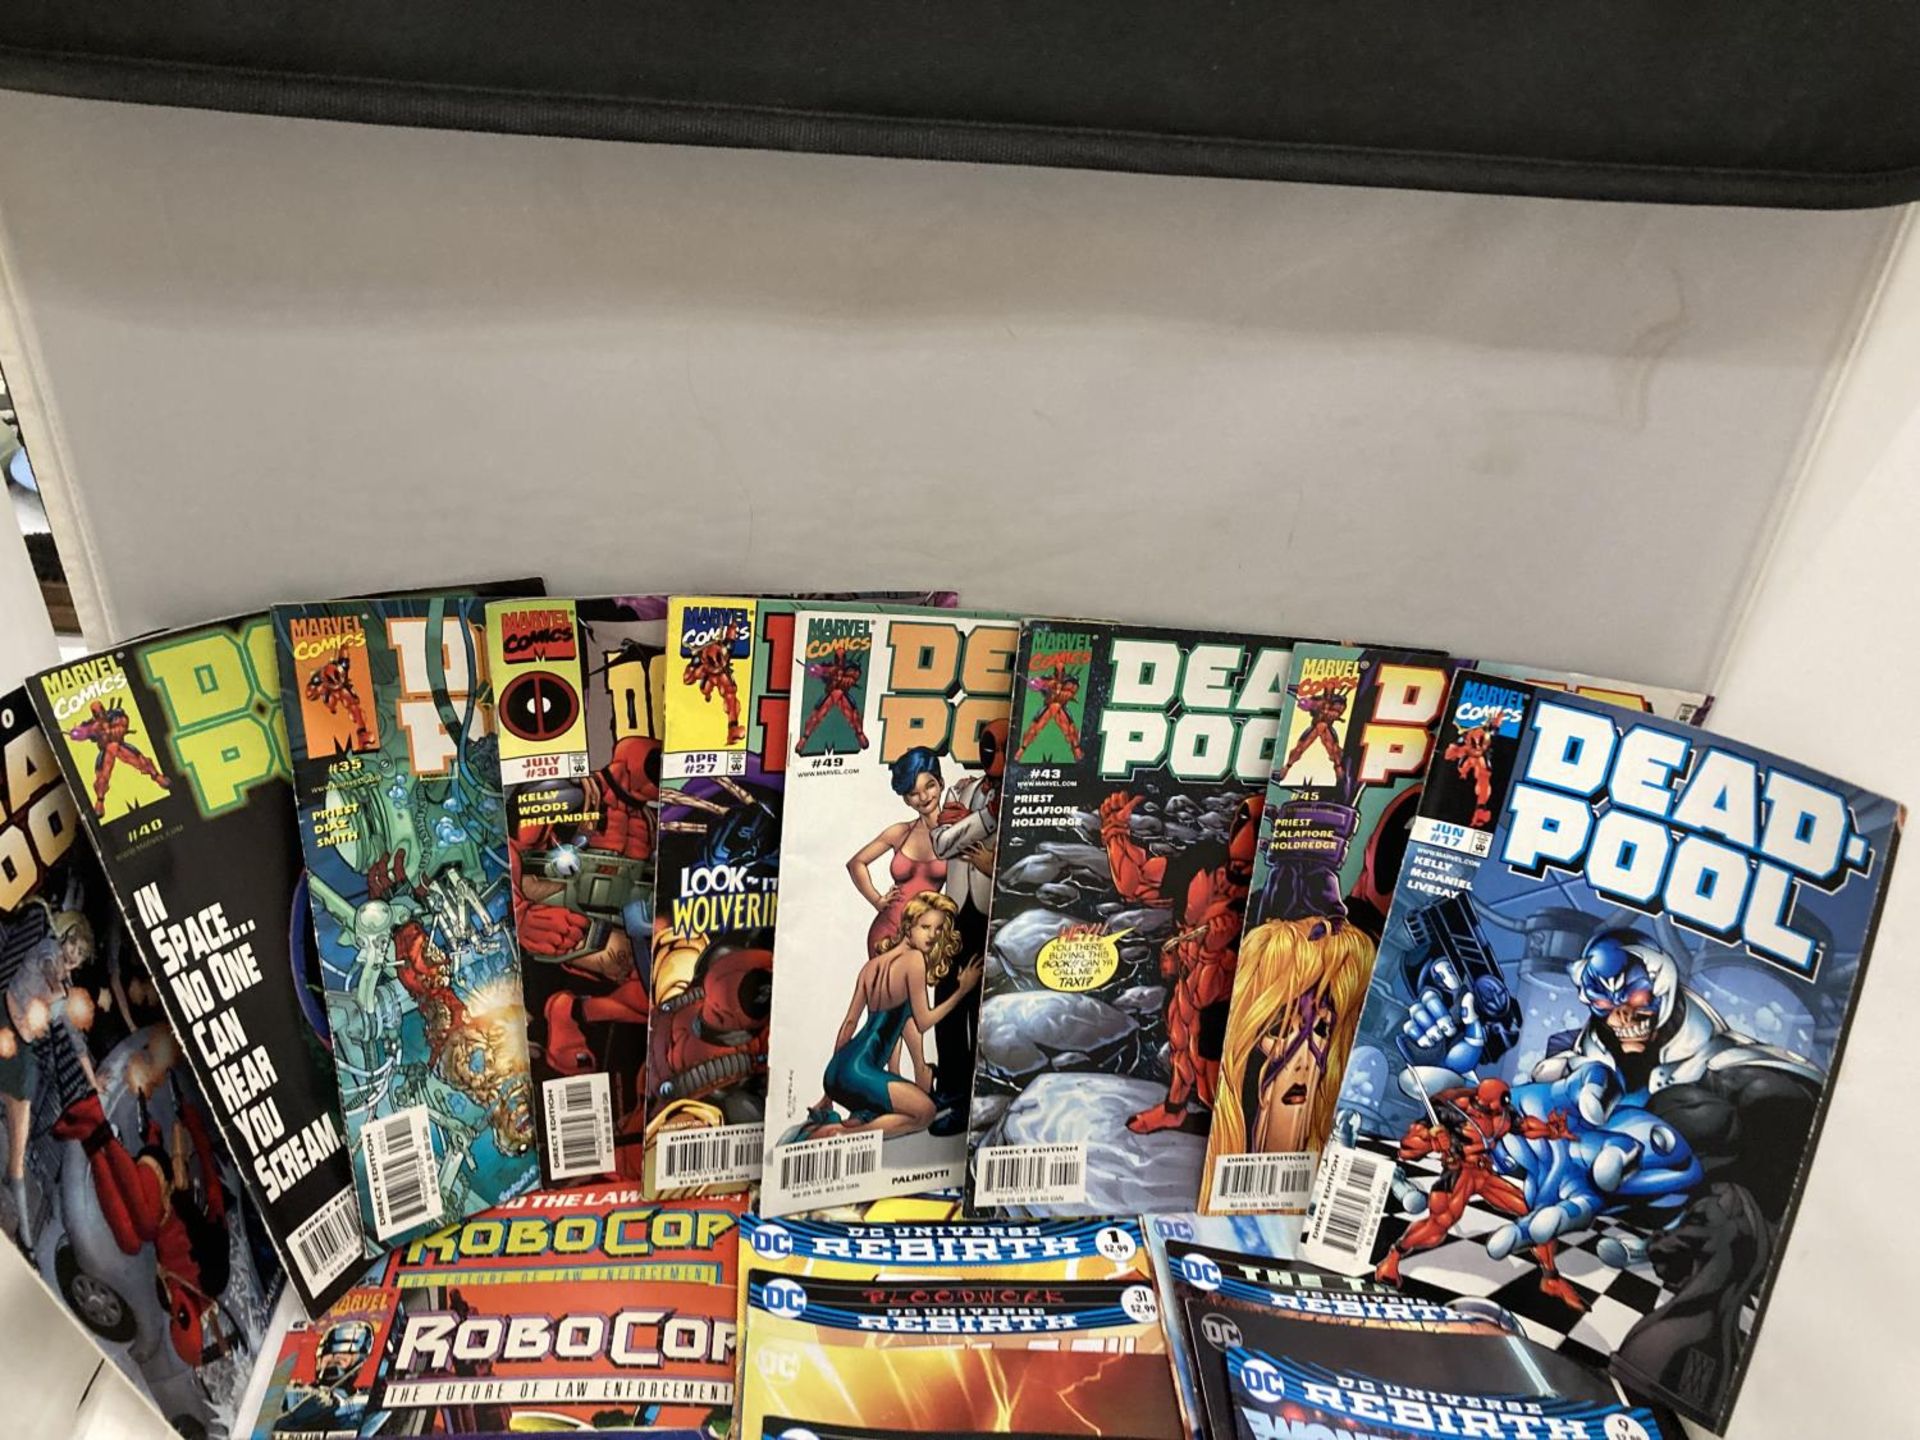 THREE MARVEL ROBOCOP COMICS FROM 1990 - BRONZE AGE, SIX 1980'S AND 1990'S COMICS TO INCLUDE FIVE - Image 2 of 5